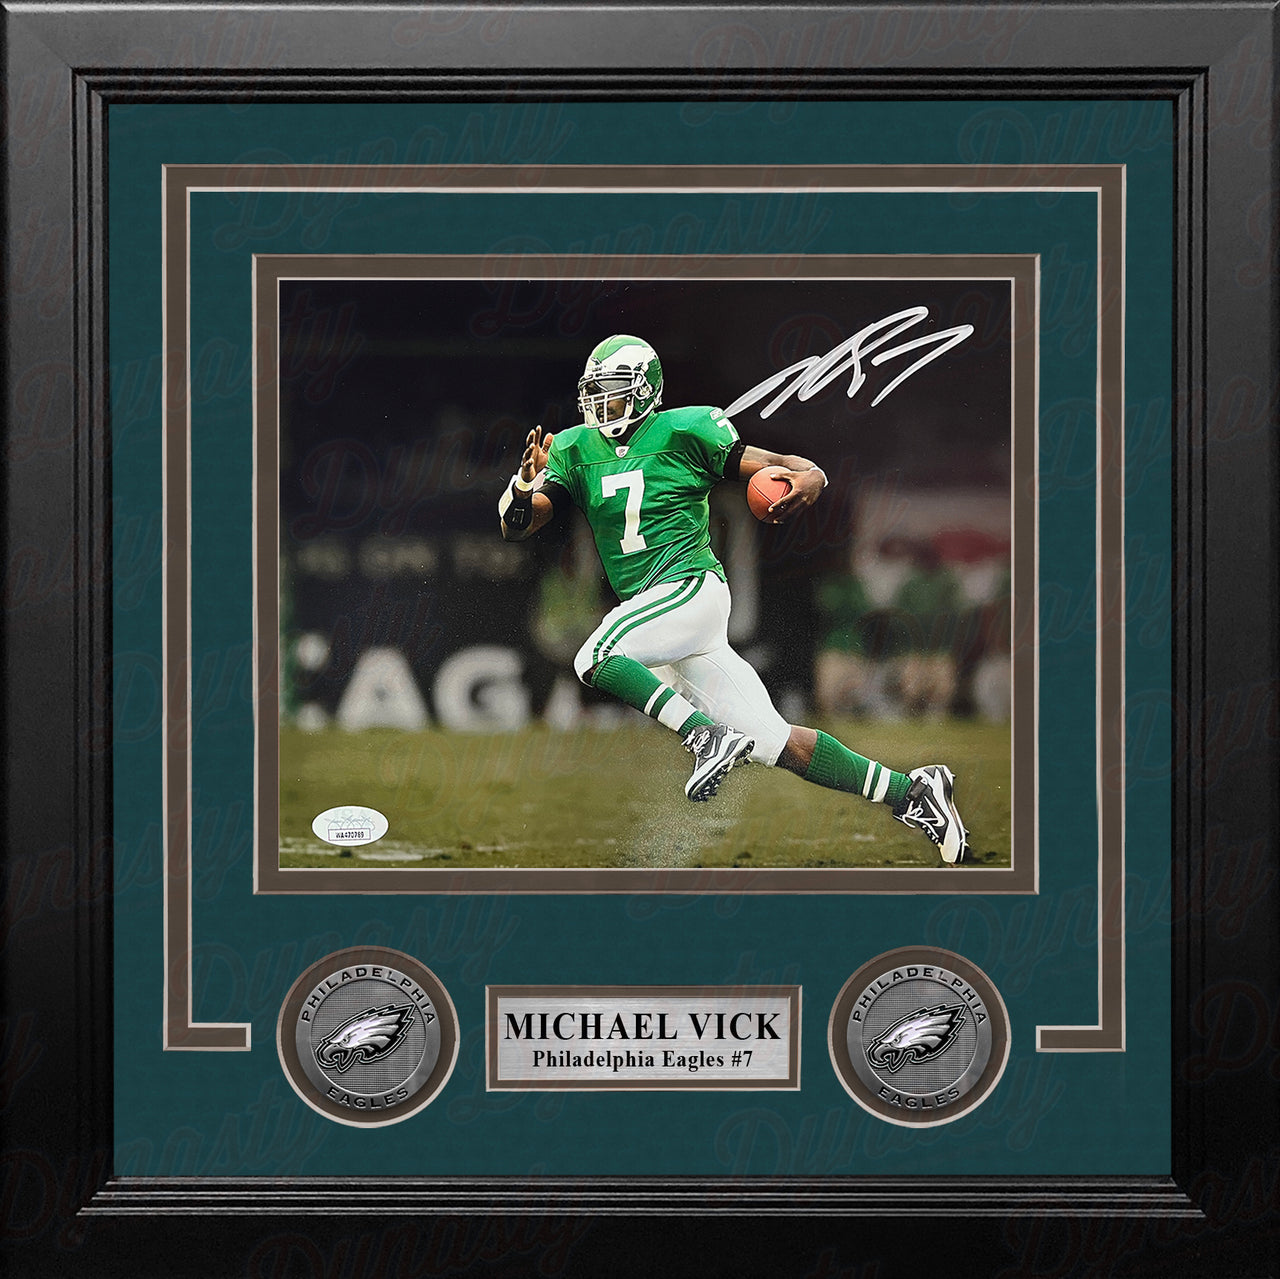 Michael Vick in Kelly Green Philadelphia Eagles Autographed Framed Blackout Football Photo - Dynasty Sports & Framing 